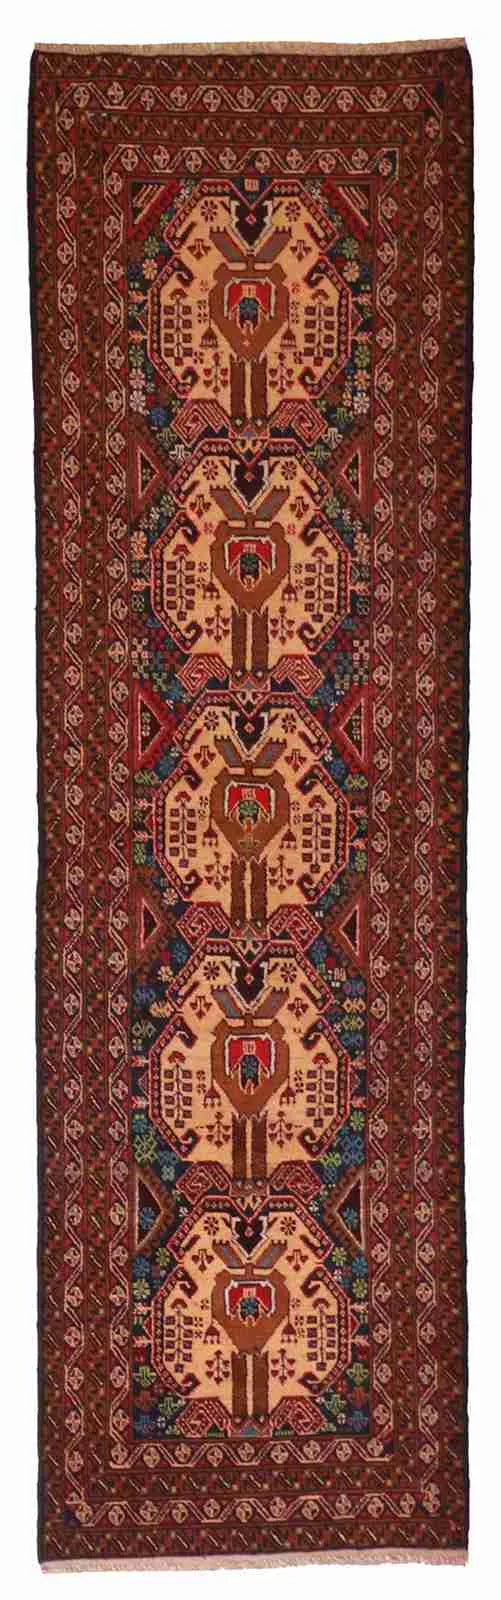 Runner - Baluch Fine Geometric Rectangle - Hand Knotted Rug